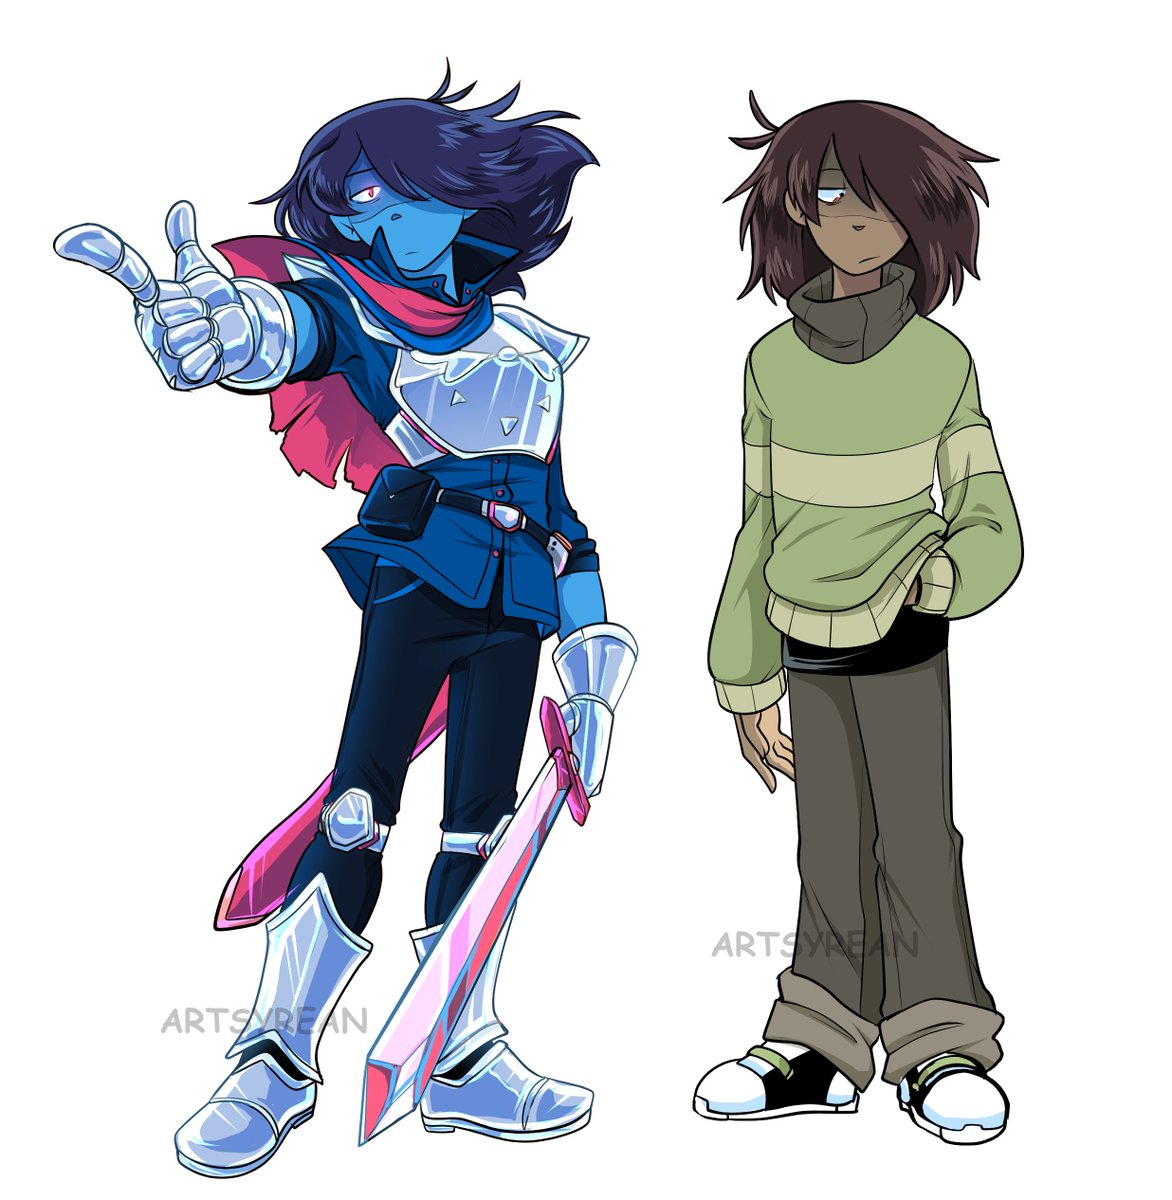 kris deltarune and their larping form